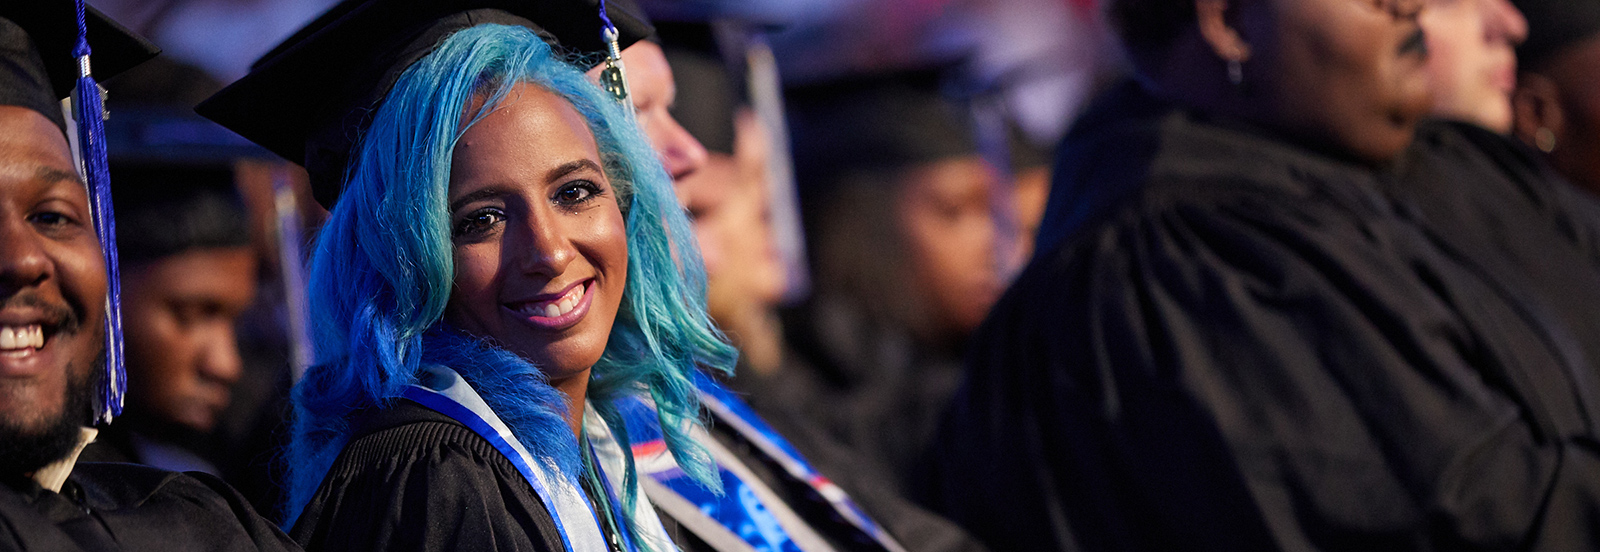 LiFE graduate with blue hair sitting in audience of graduates in commencement regalia